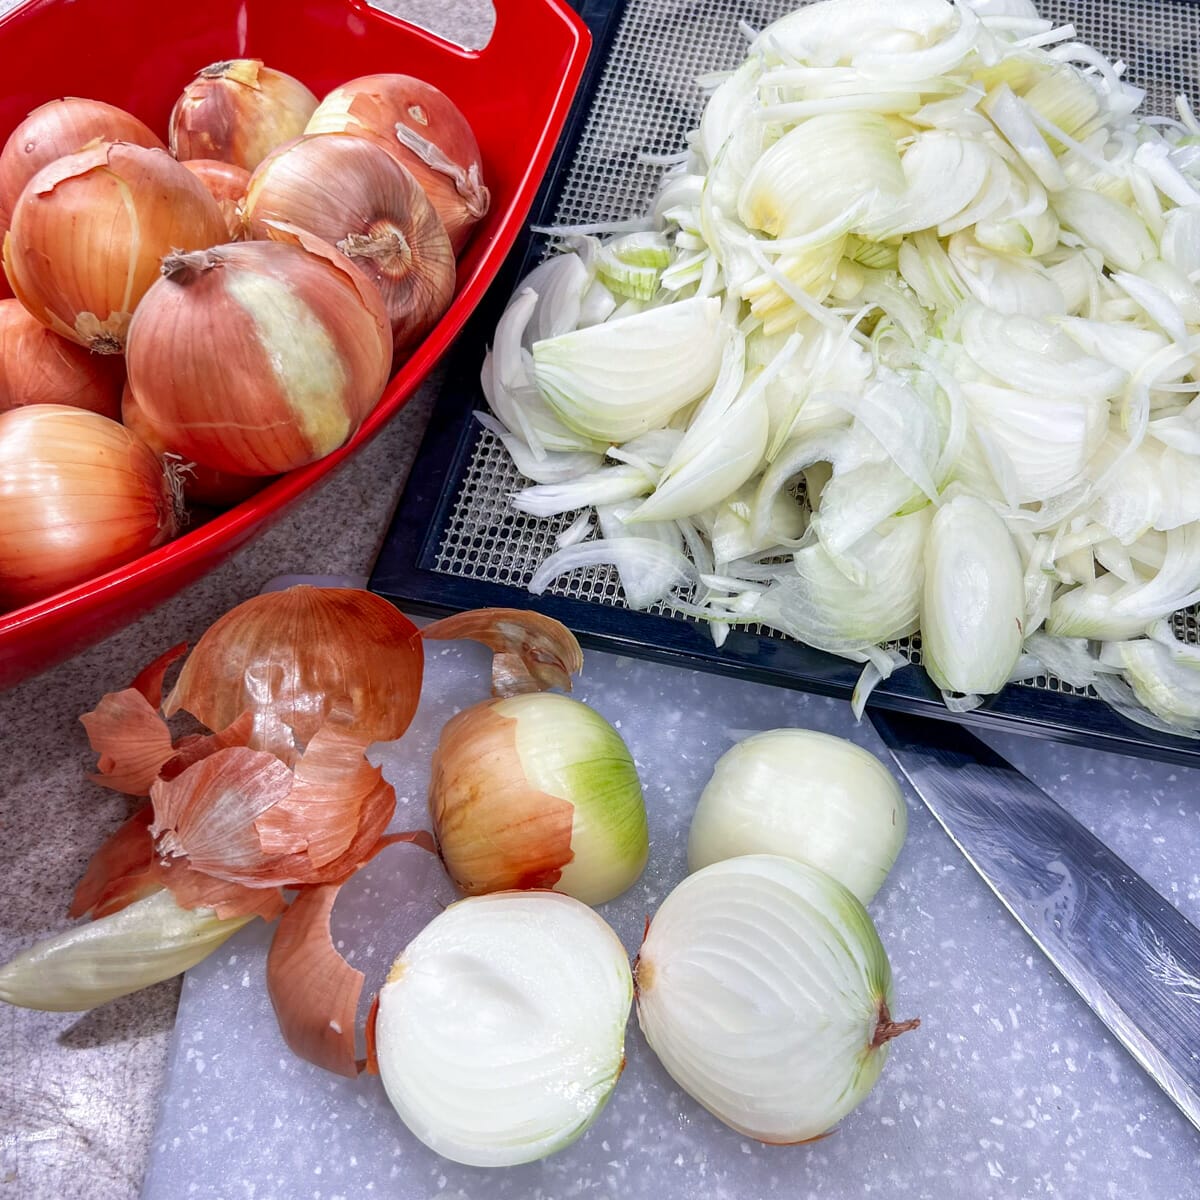 mix of whole, cut and sliced onions on cutting board with knife